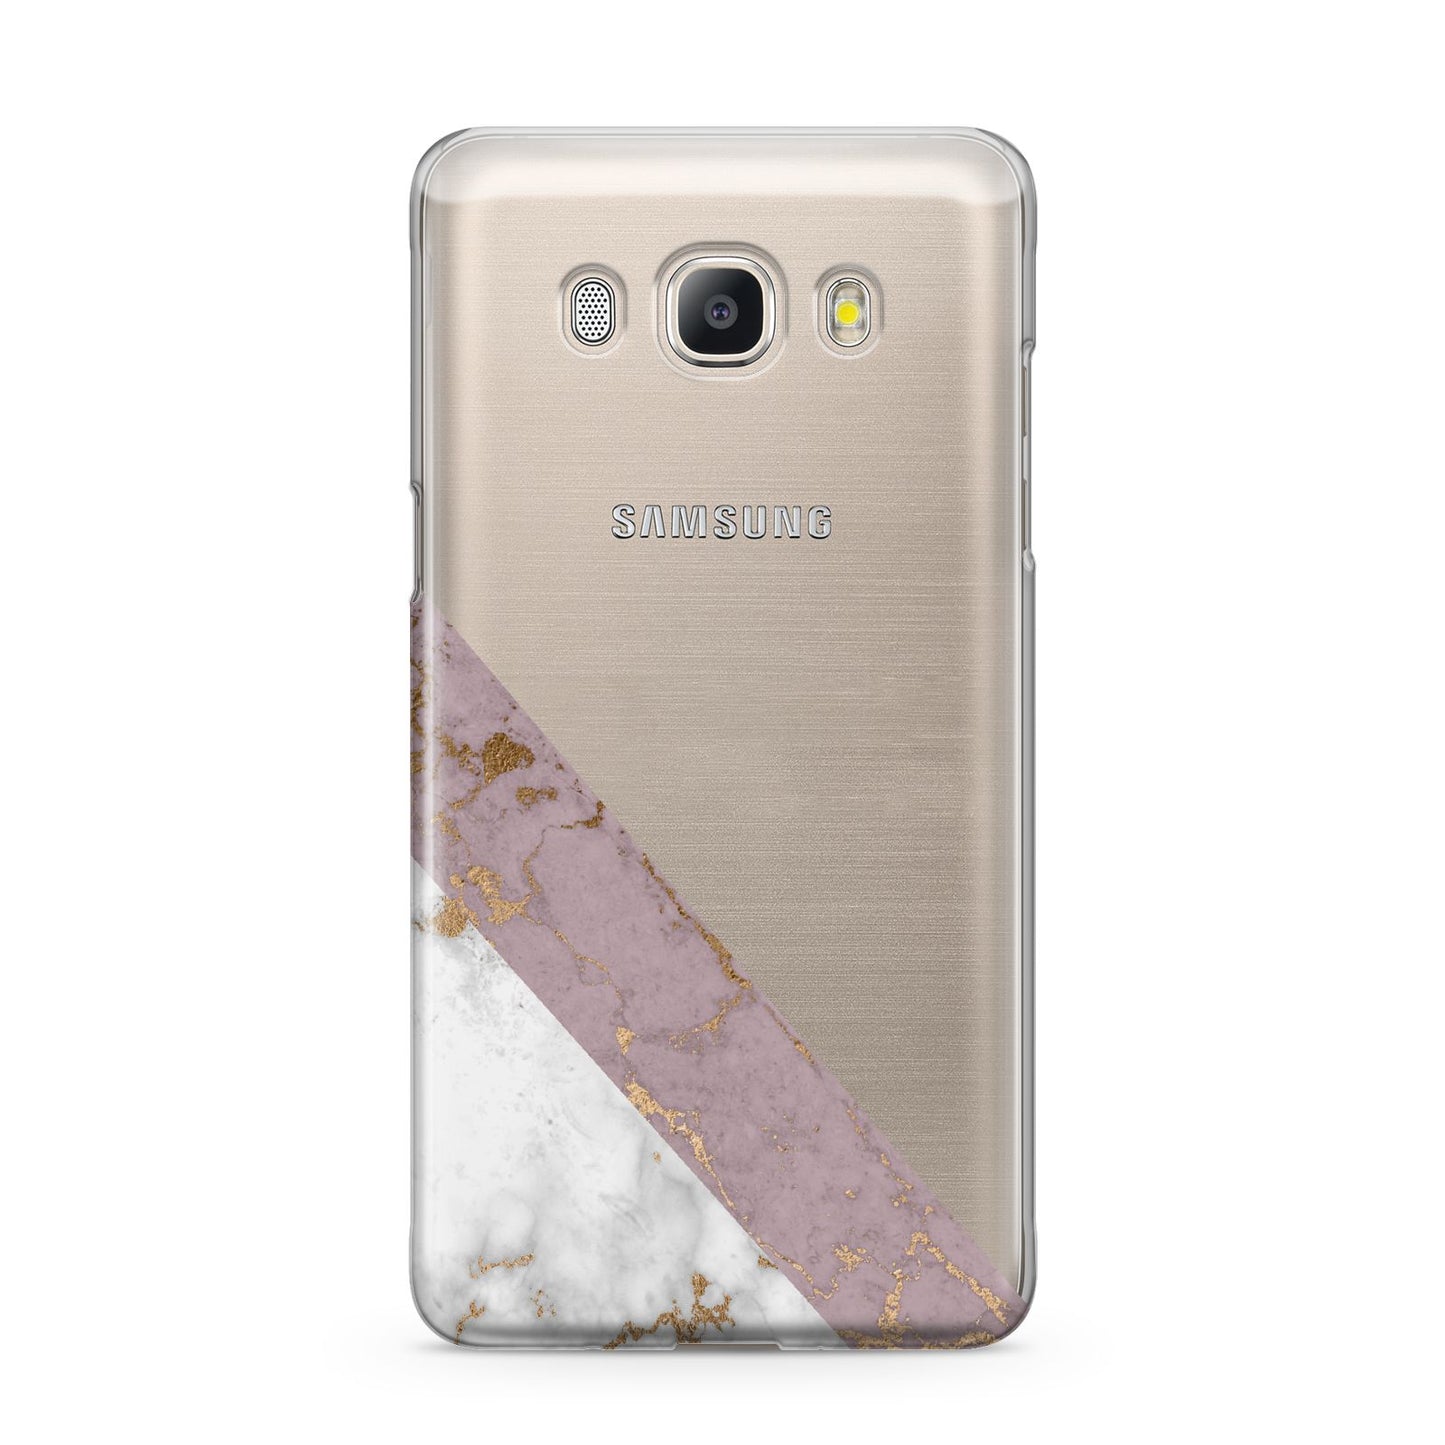 Transparent Pink and White Marble Samsung Galaxy J5 2016 Case